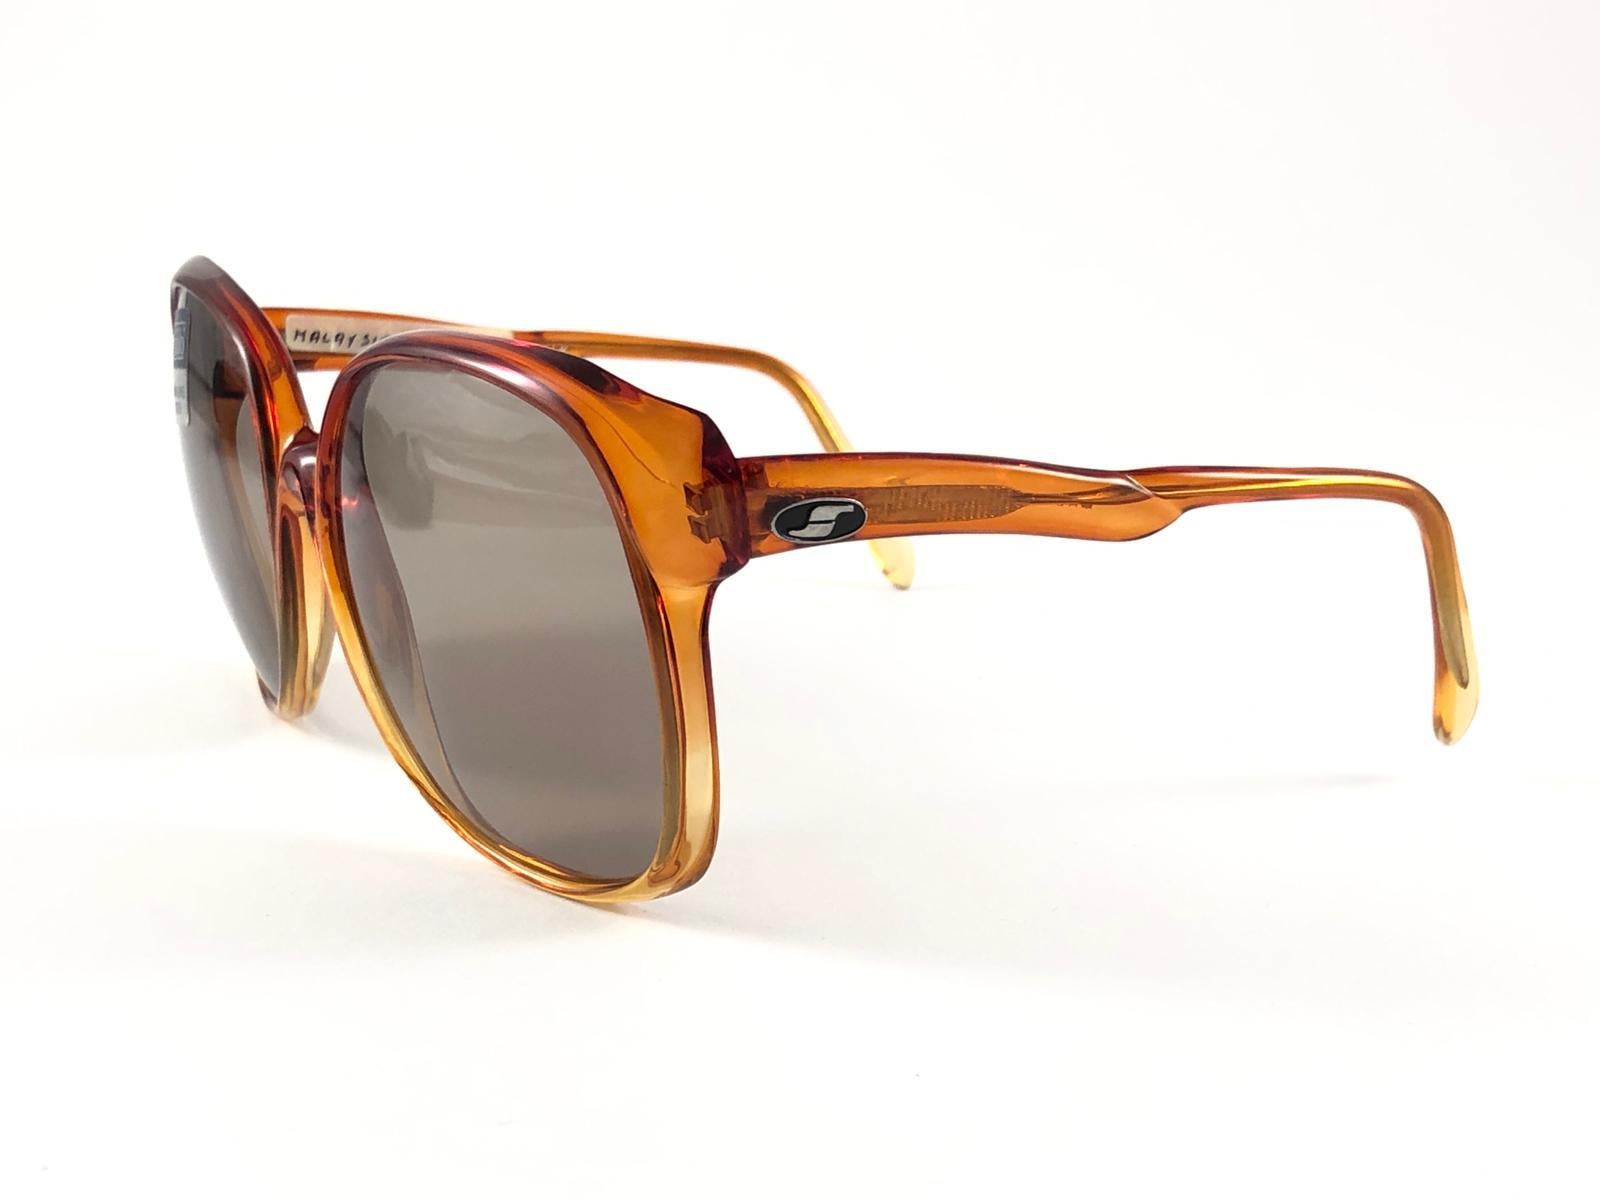 New Vintage Safilo, a balanced combination of Italian craftsmanship, design, functionality and striking aesthetics, this model showcases a translucent amber frame holding amber lenses. 

New, never worn or displayed.
Made in